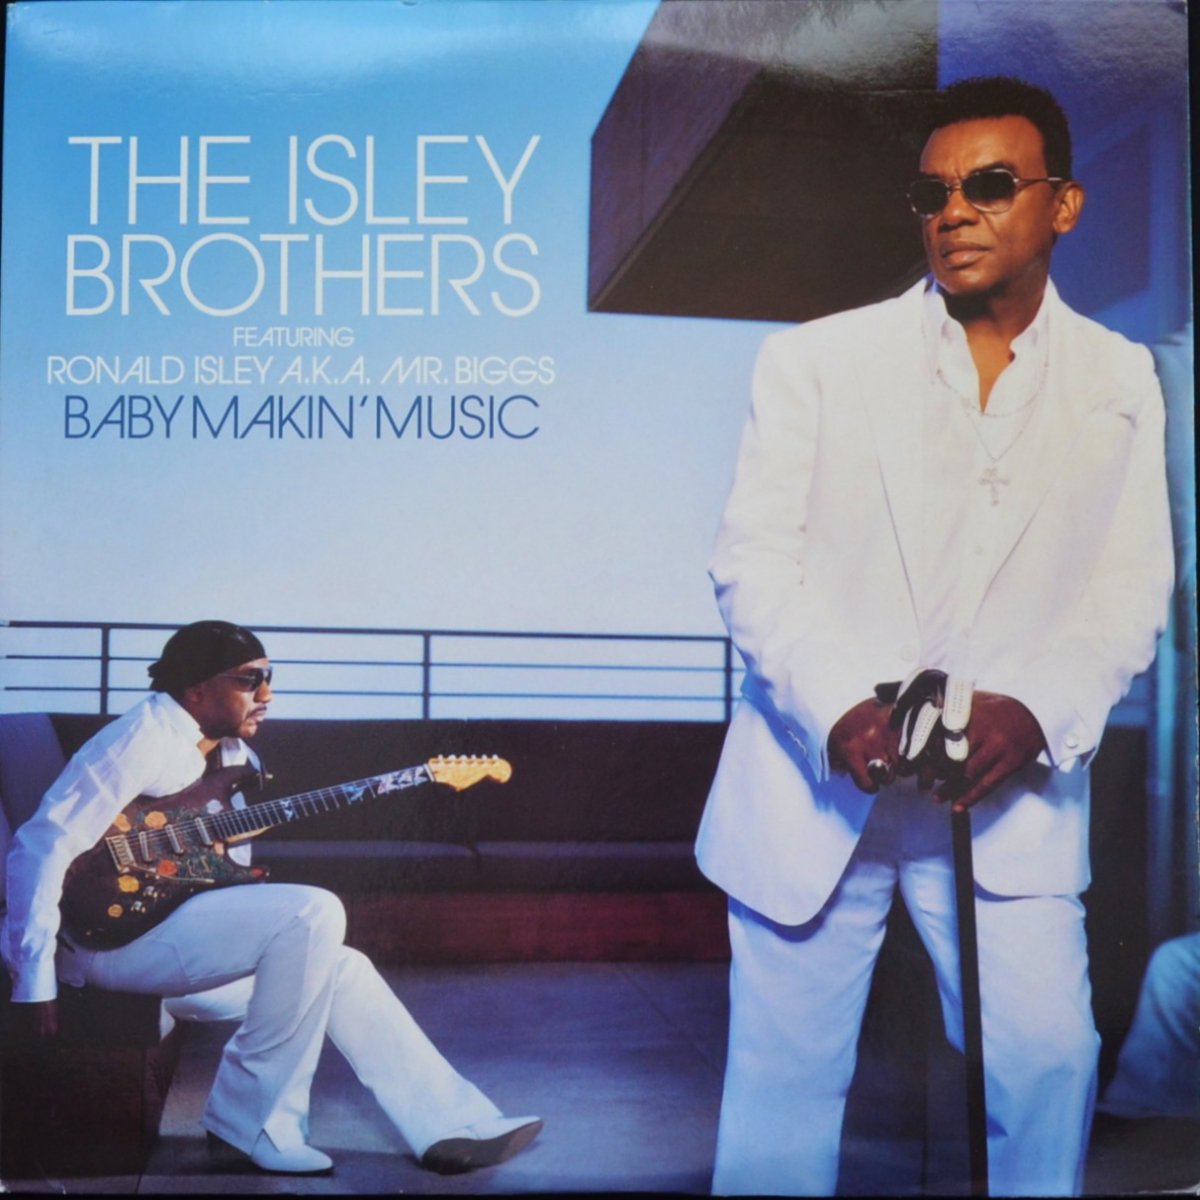 THE ISLEY BROTHERS FEATURING RONALD ISLEY A.K.A. MR. BIGGS / BABY MAKIN' MUSIC (2LP)